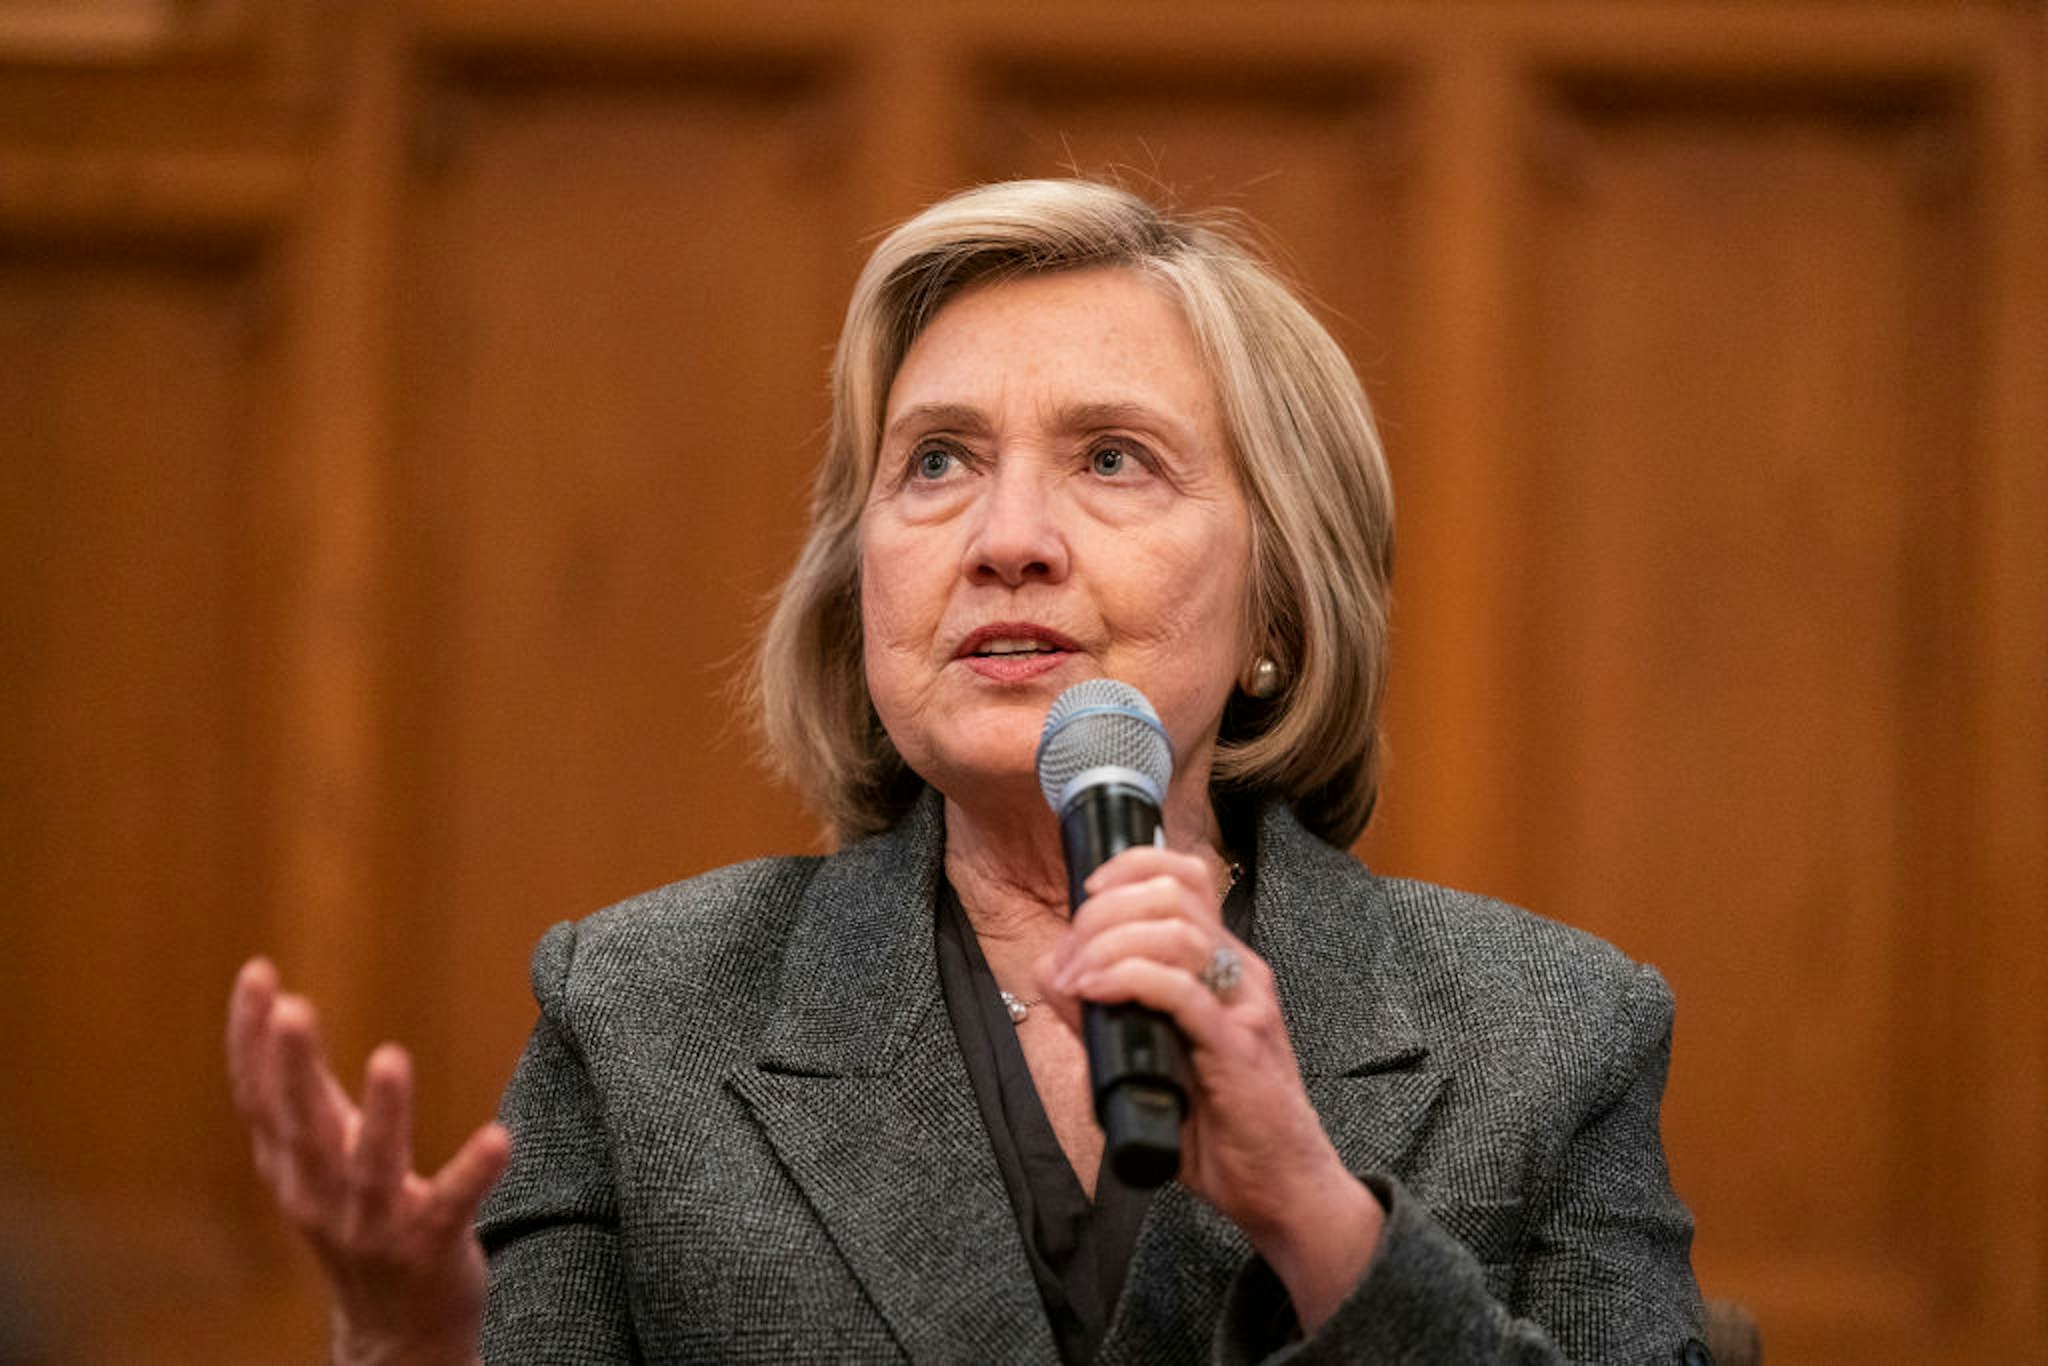 Hillary Clinton spoke during a book event promoting her new book